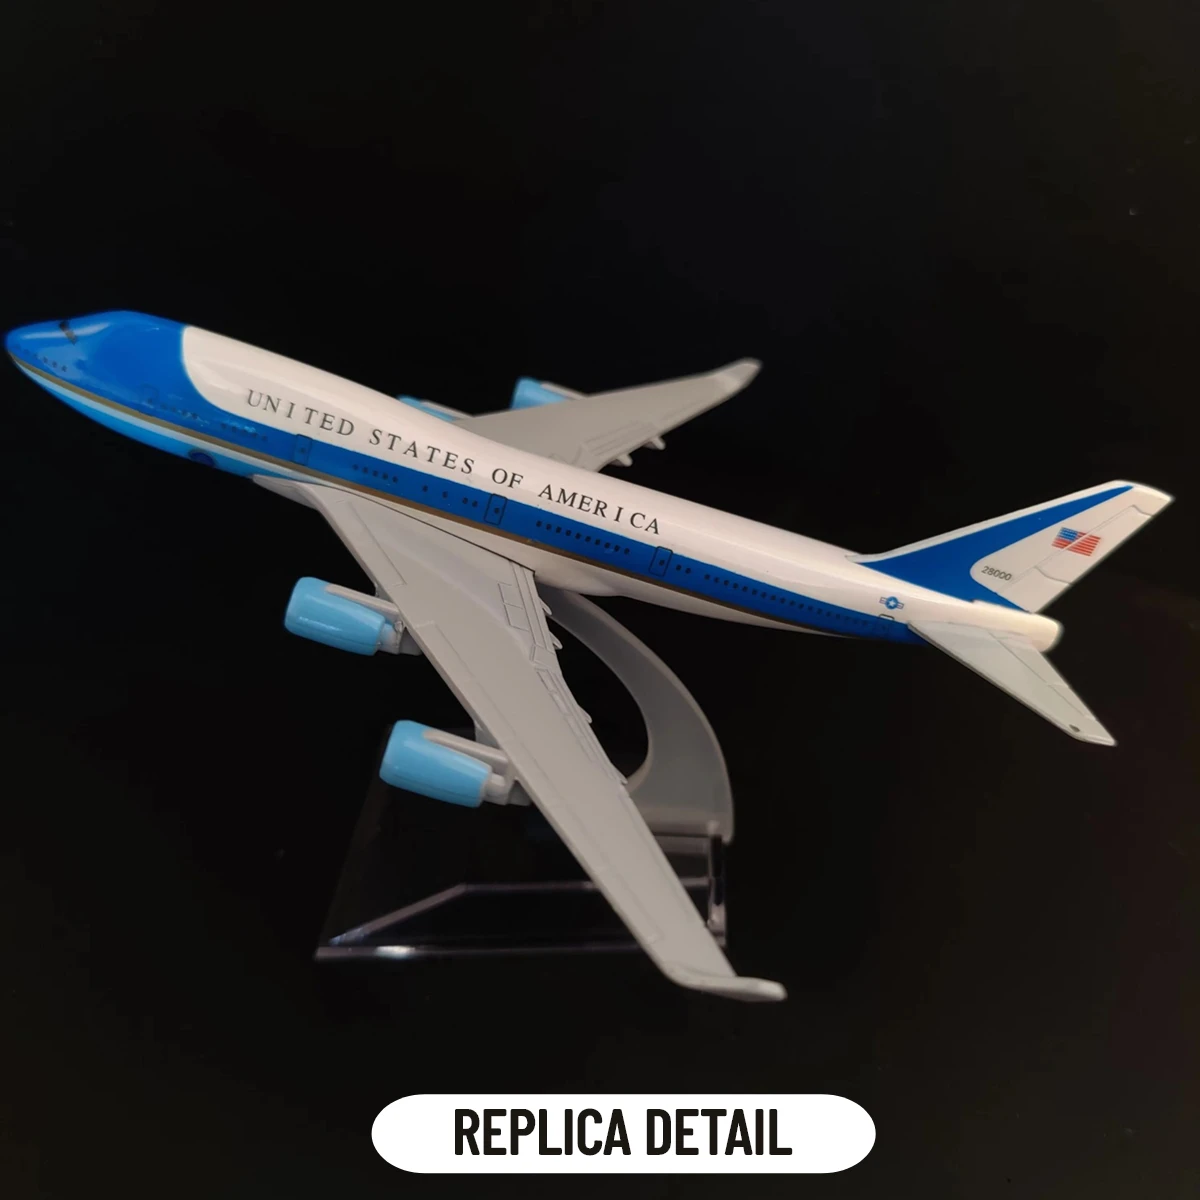 Replica 15cm american president b747 aircraft boeing model aviation collectible diecast thumb200